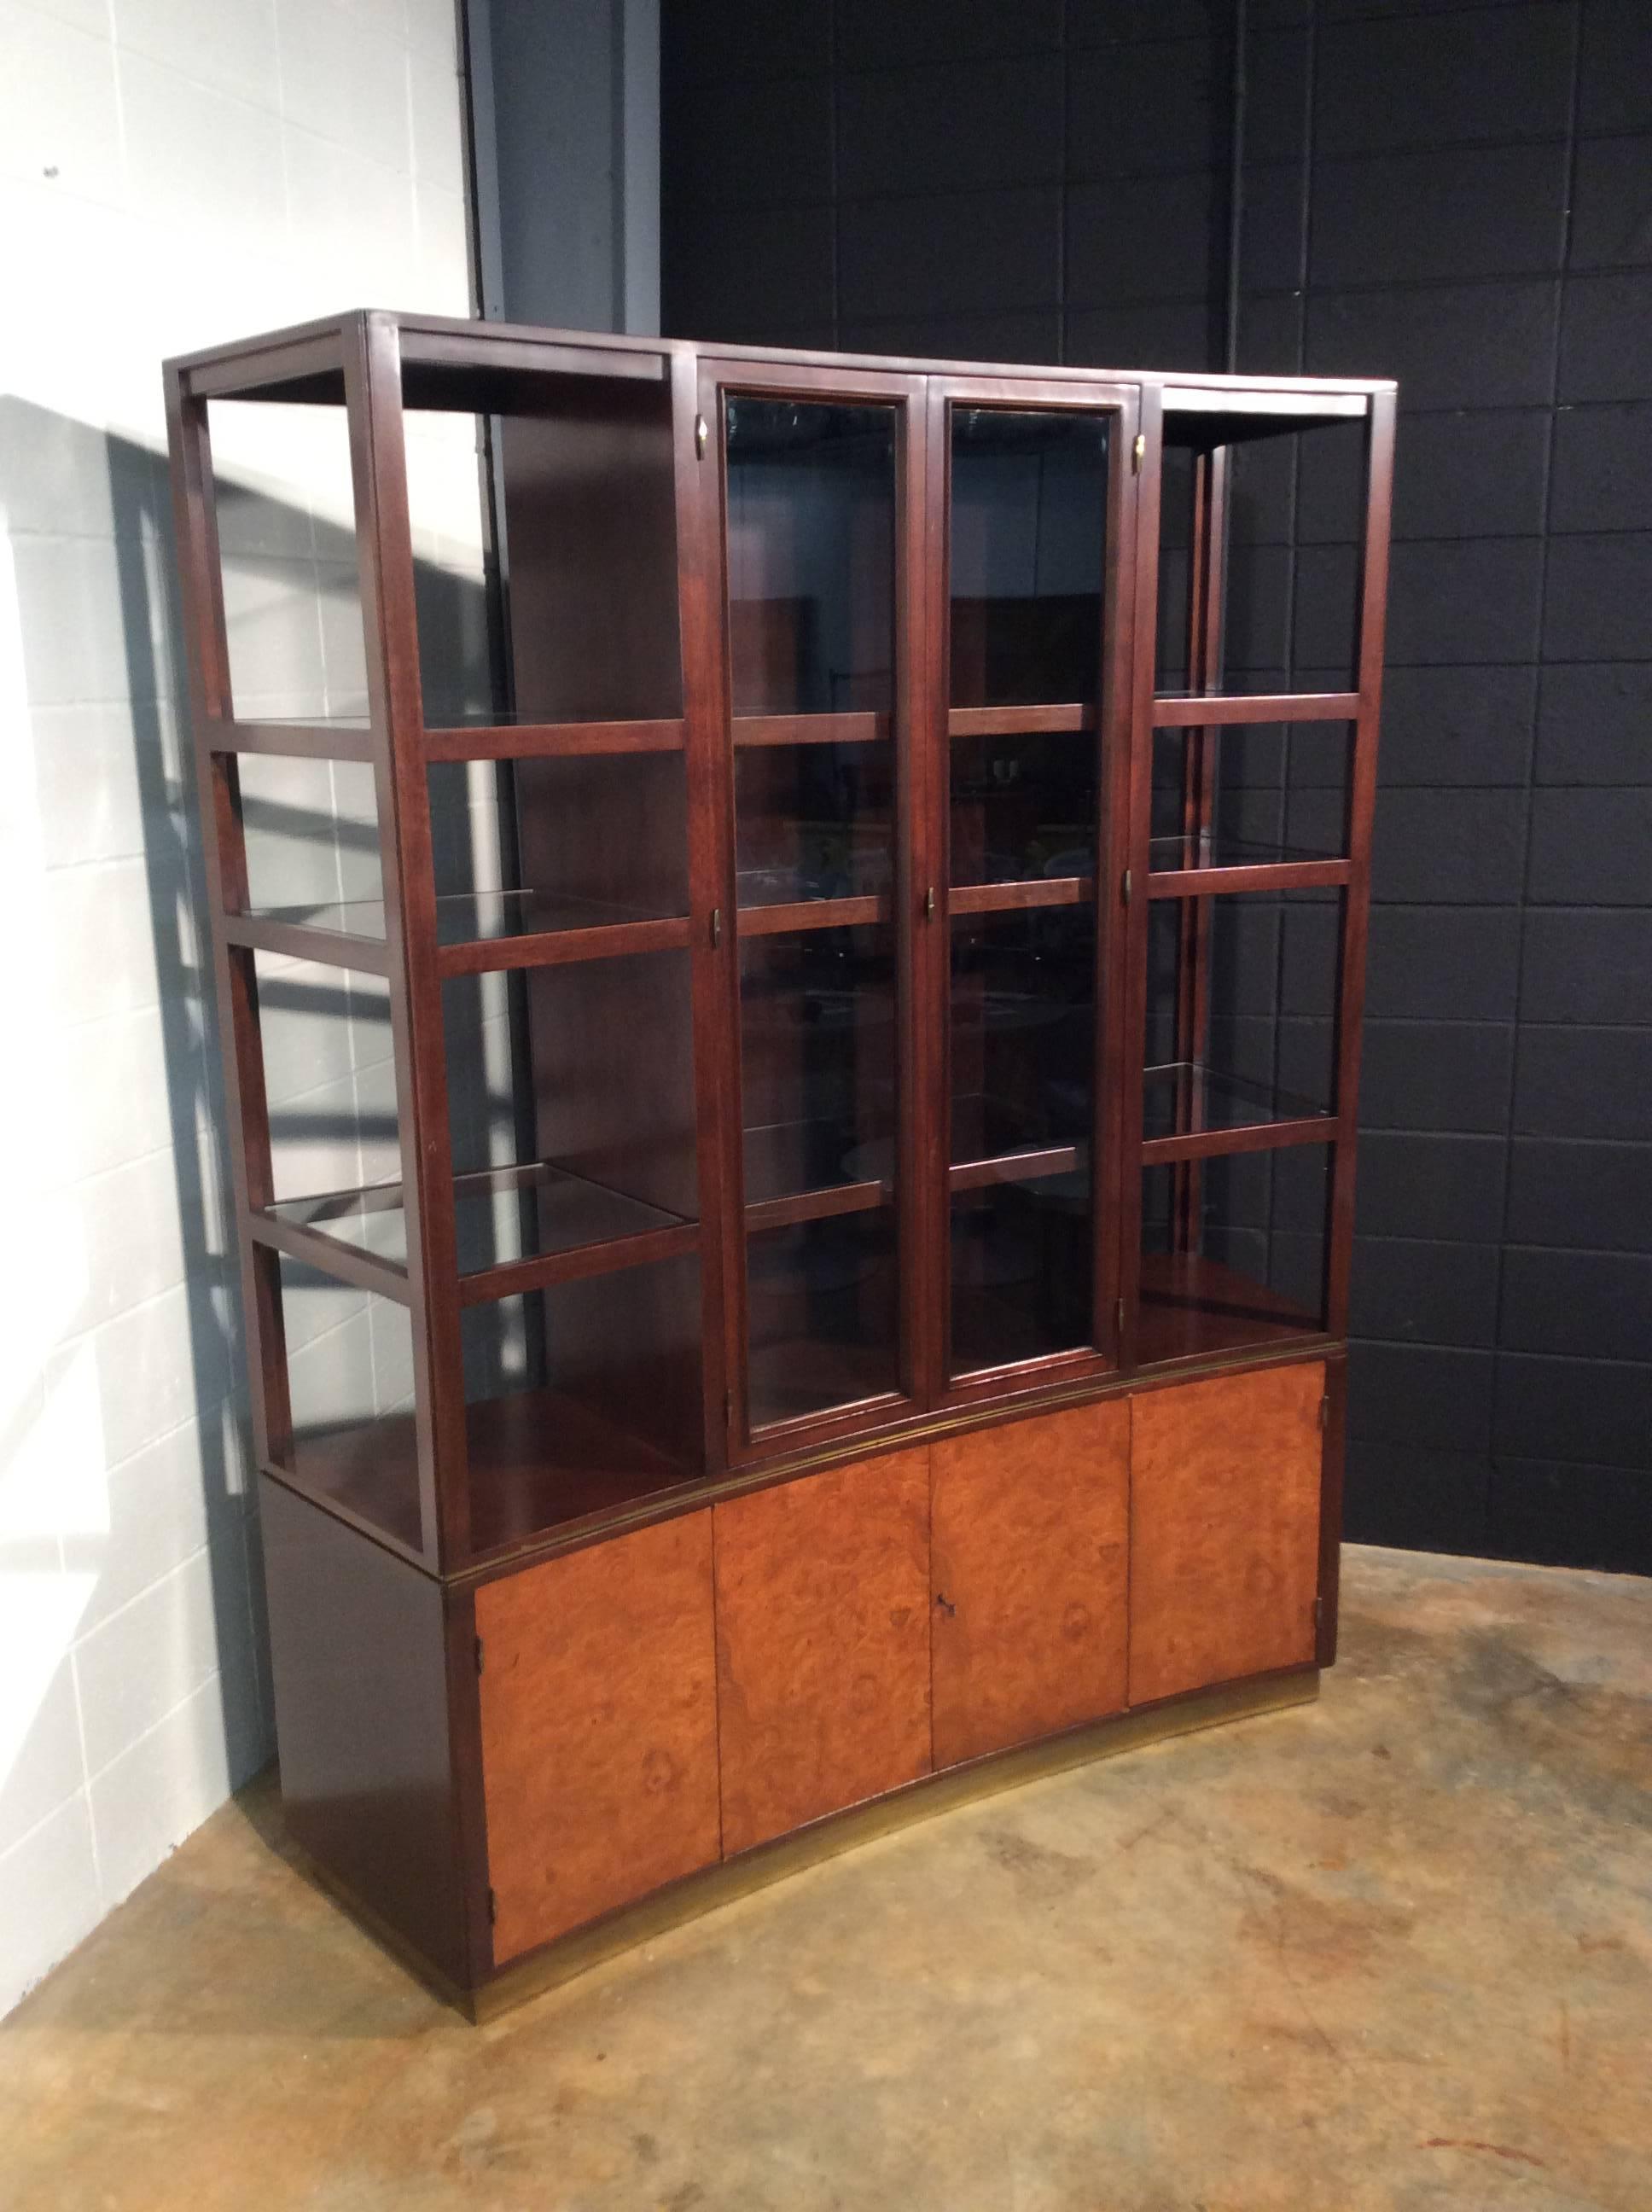 Timeless curved display cabinet superstructure designed by Edward J Wormley for Dunbar -Model No 6027. At 80 inches tall and constructed from Mahogany and Burl, this statement piece will add plenty of display space to a room. Very versatile and